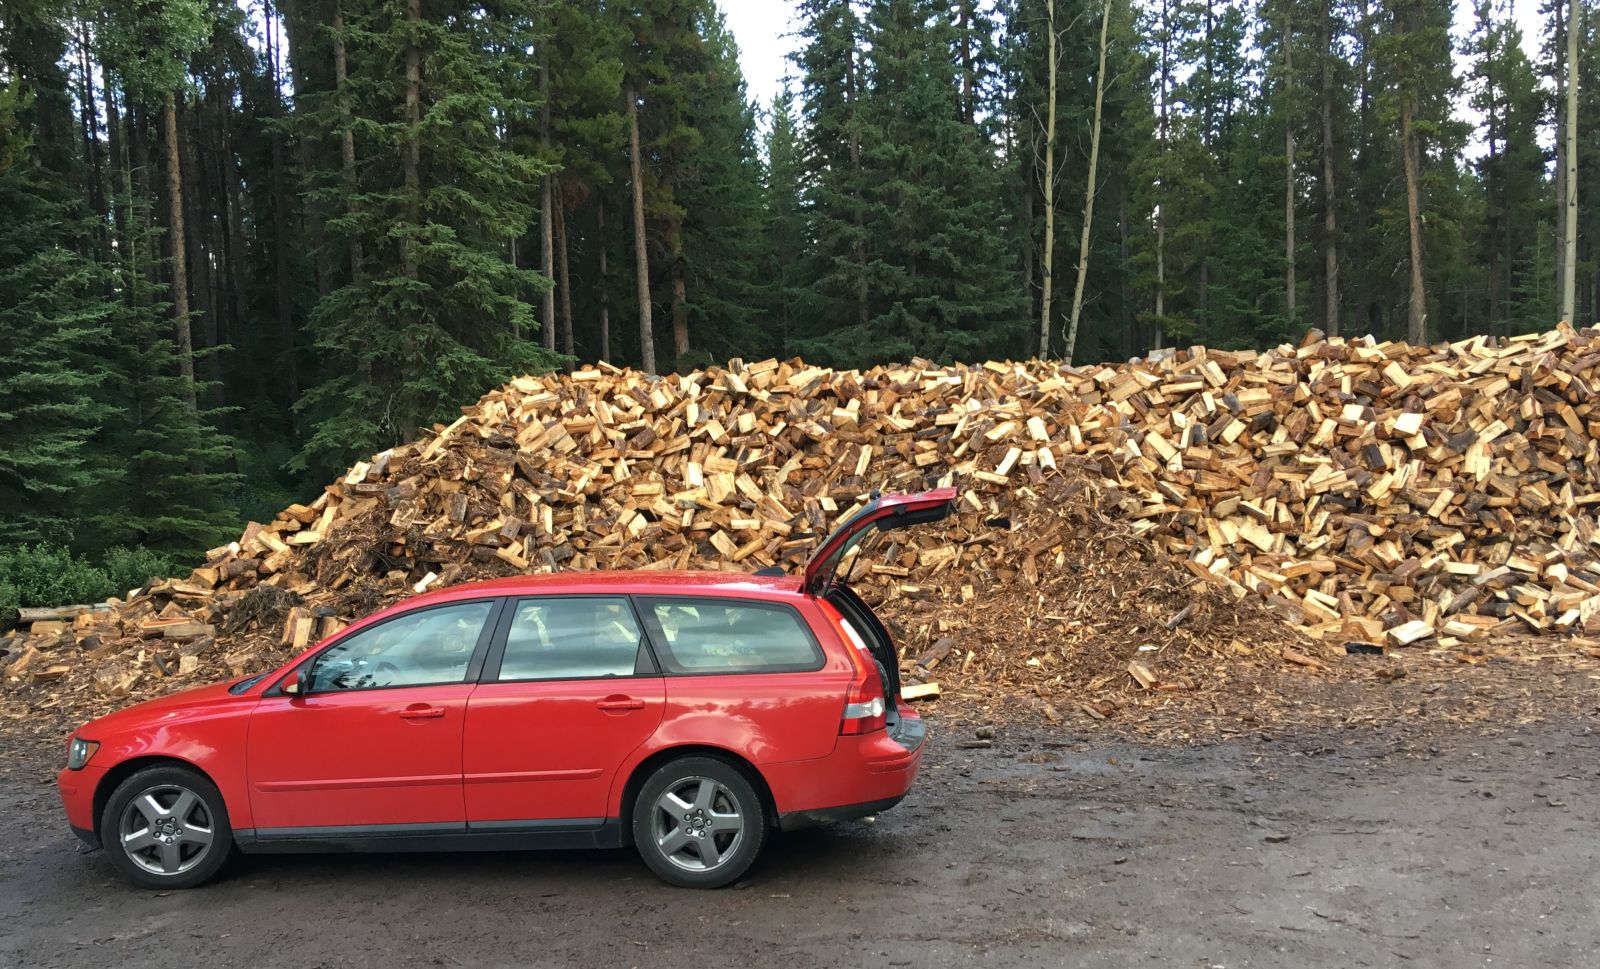 Illustration for article titled So It Turned Out This Is How You Get Firewood in Canadian National Parks